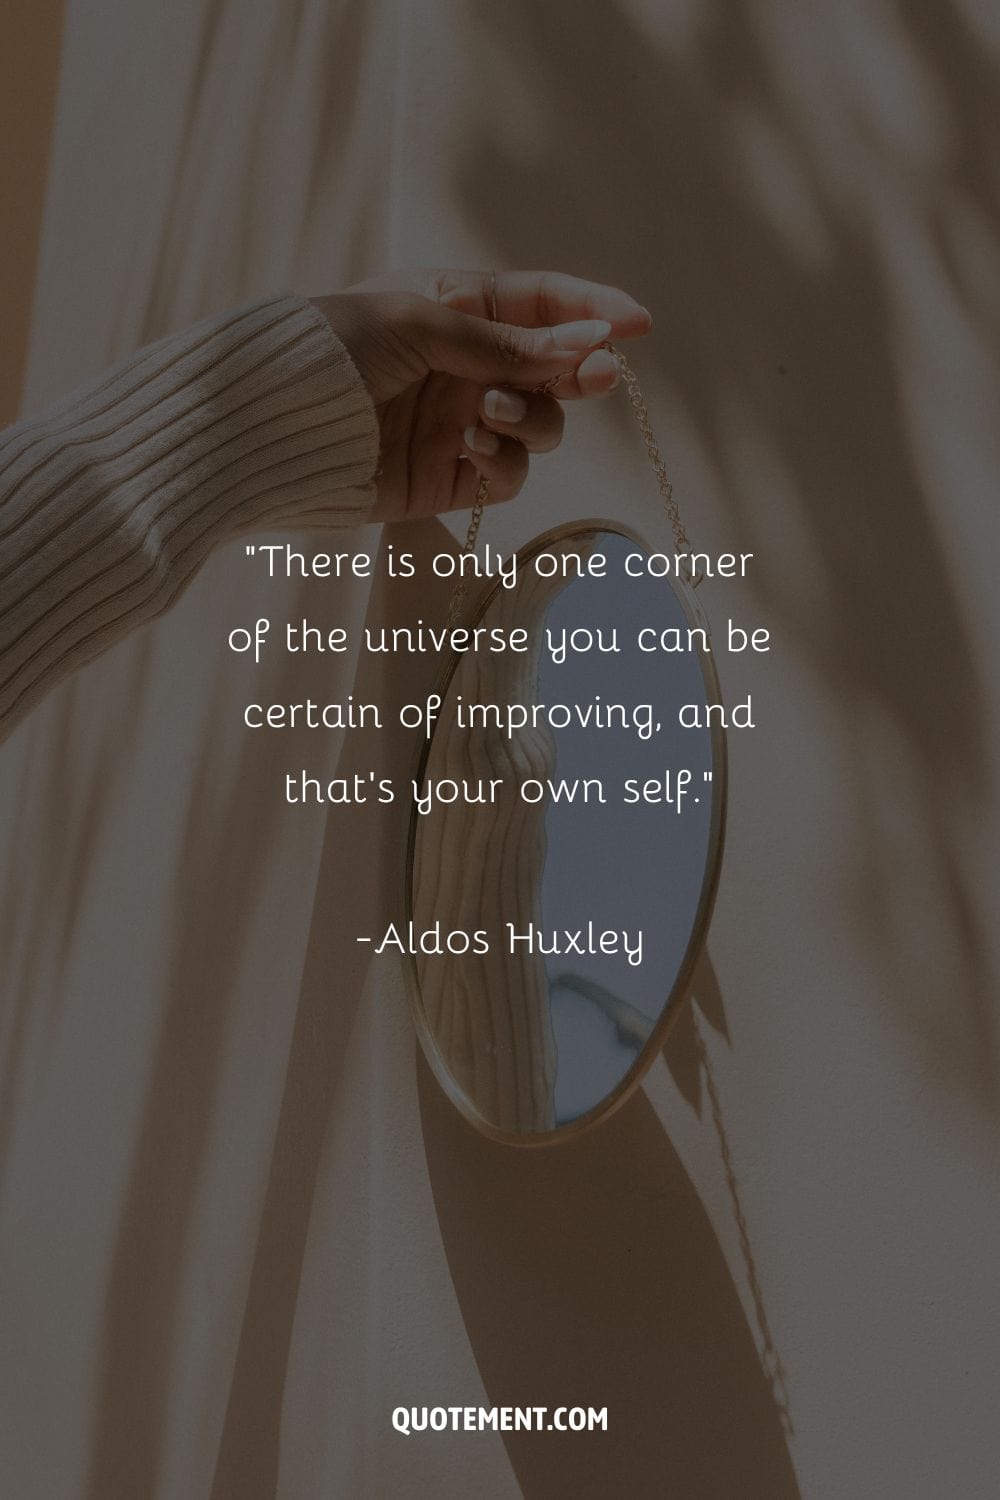 There is only one corner of the universe you can be certain of improving, and that’s your own self. – Aldos Huxley